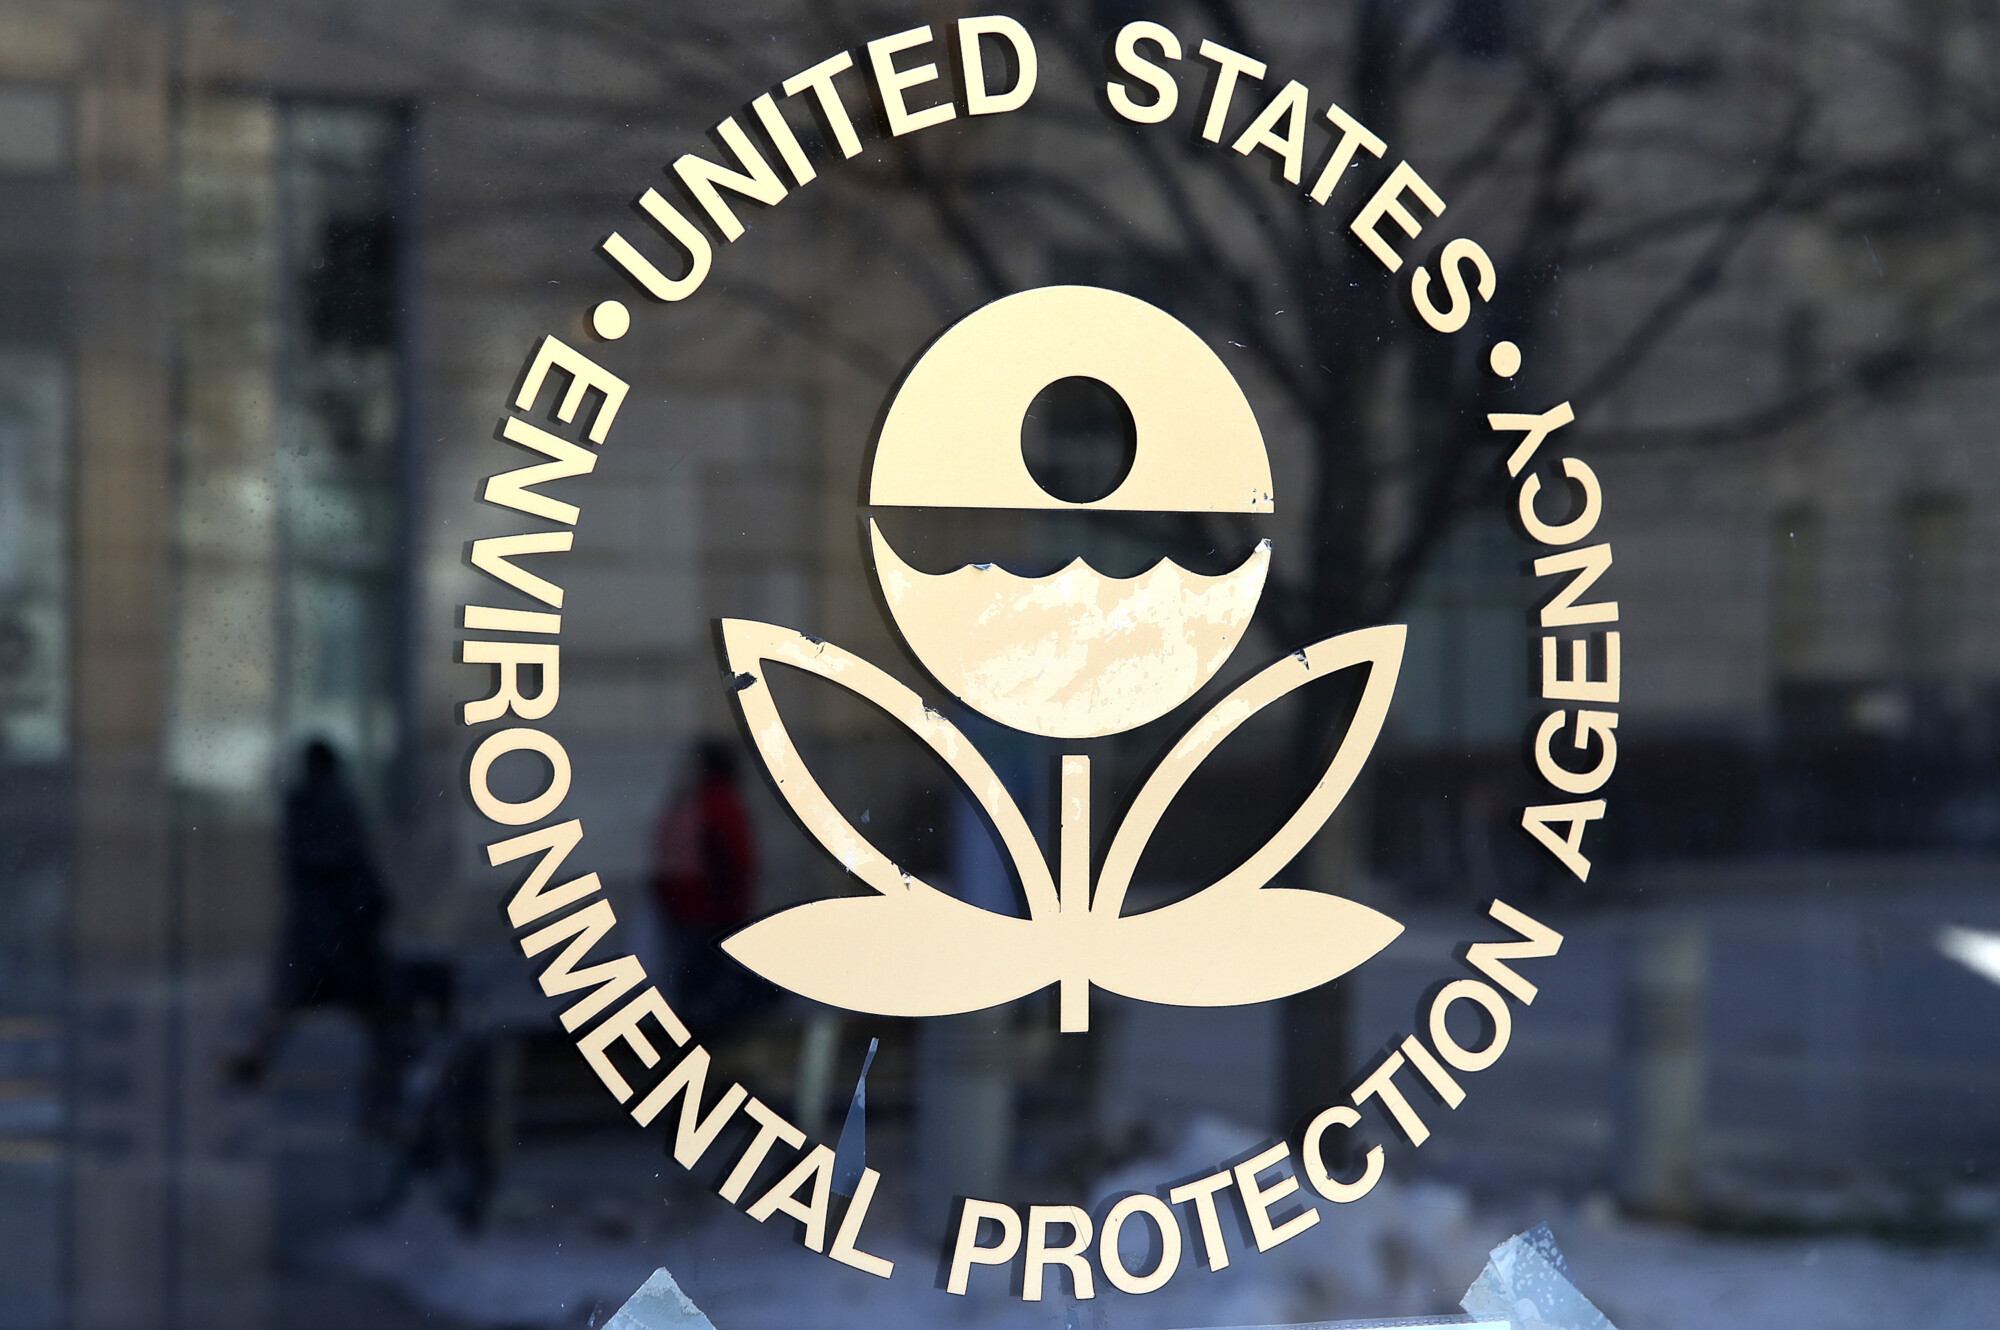 EPA to Phase Out Dominant Coolant in Air Conditioners